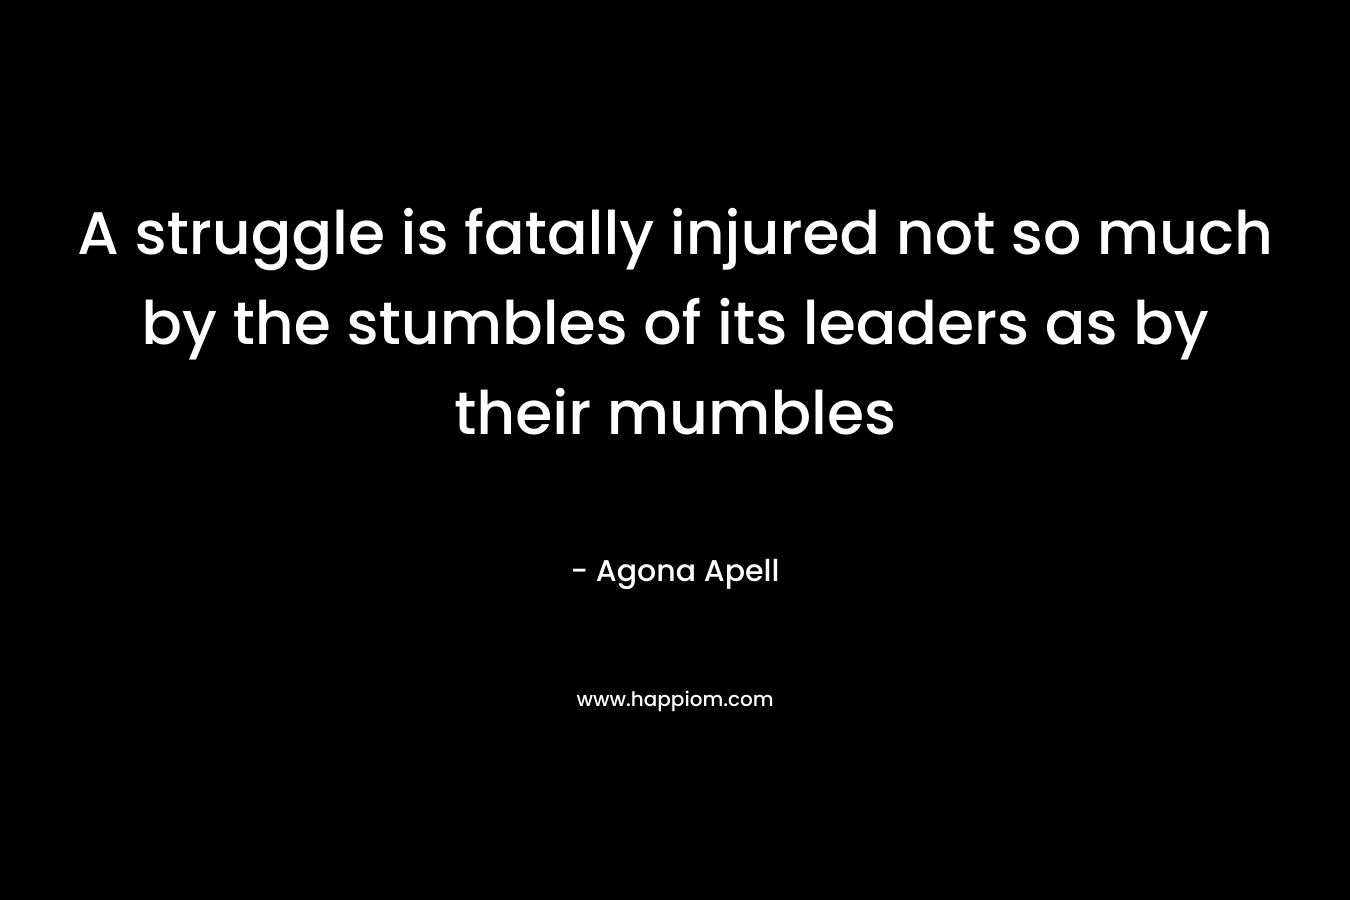 A struggle is fatally injured not so much by the stumbles of its leaders as by their mumbles